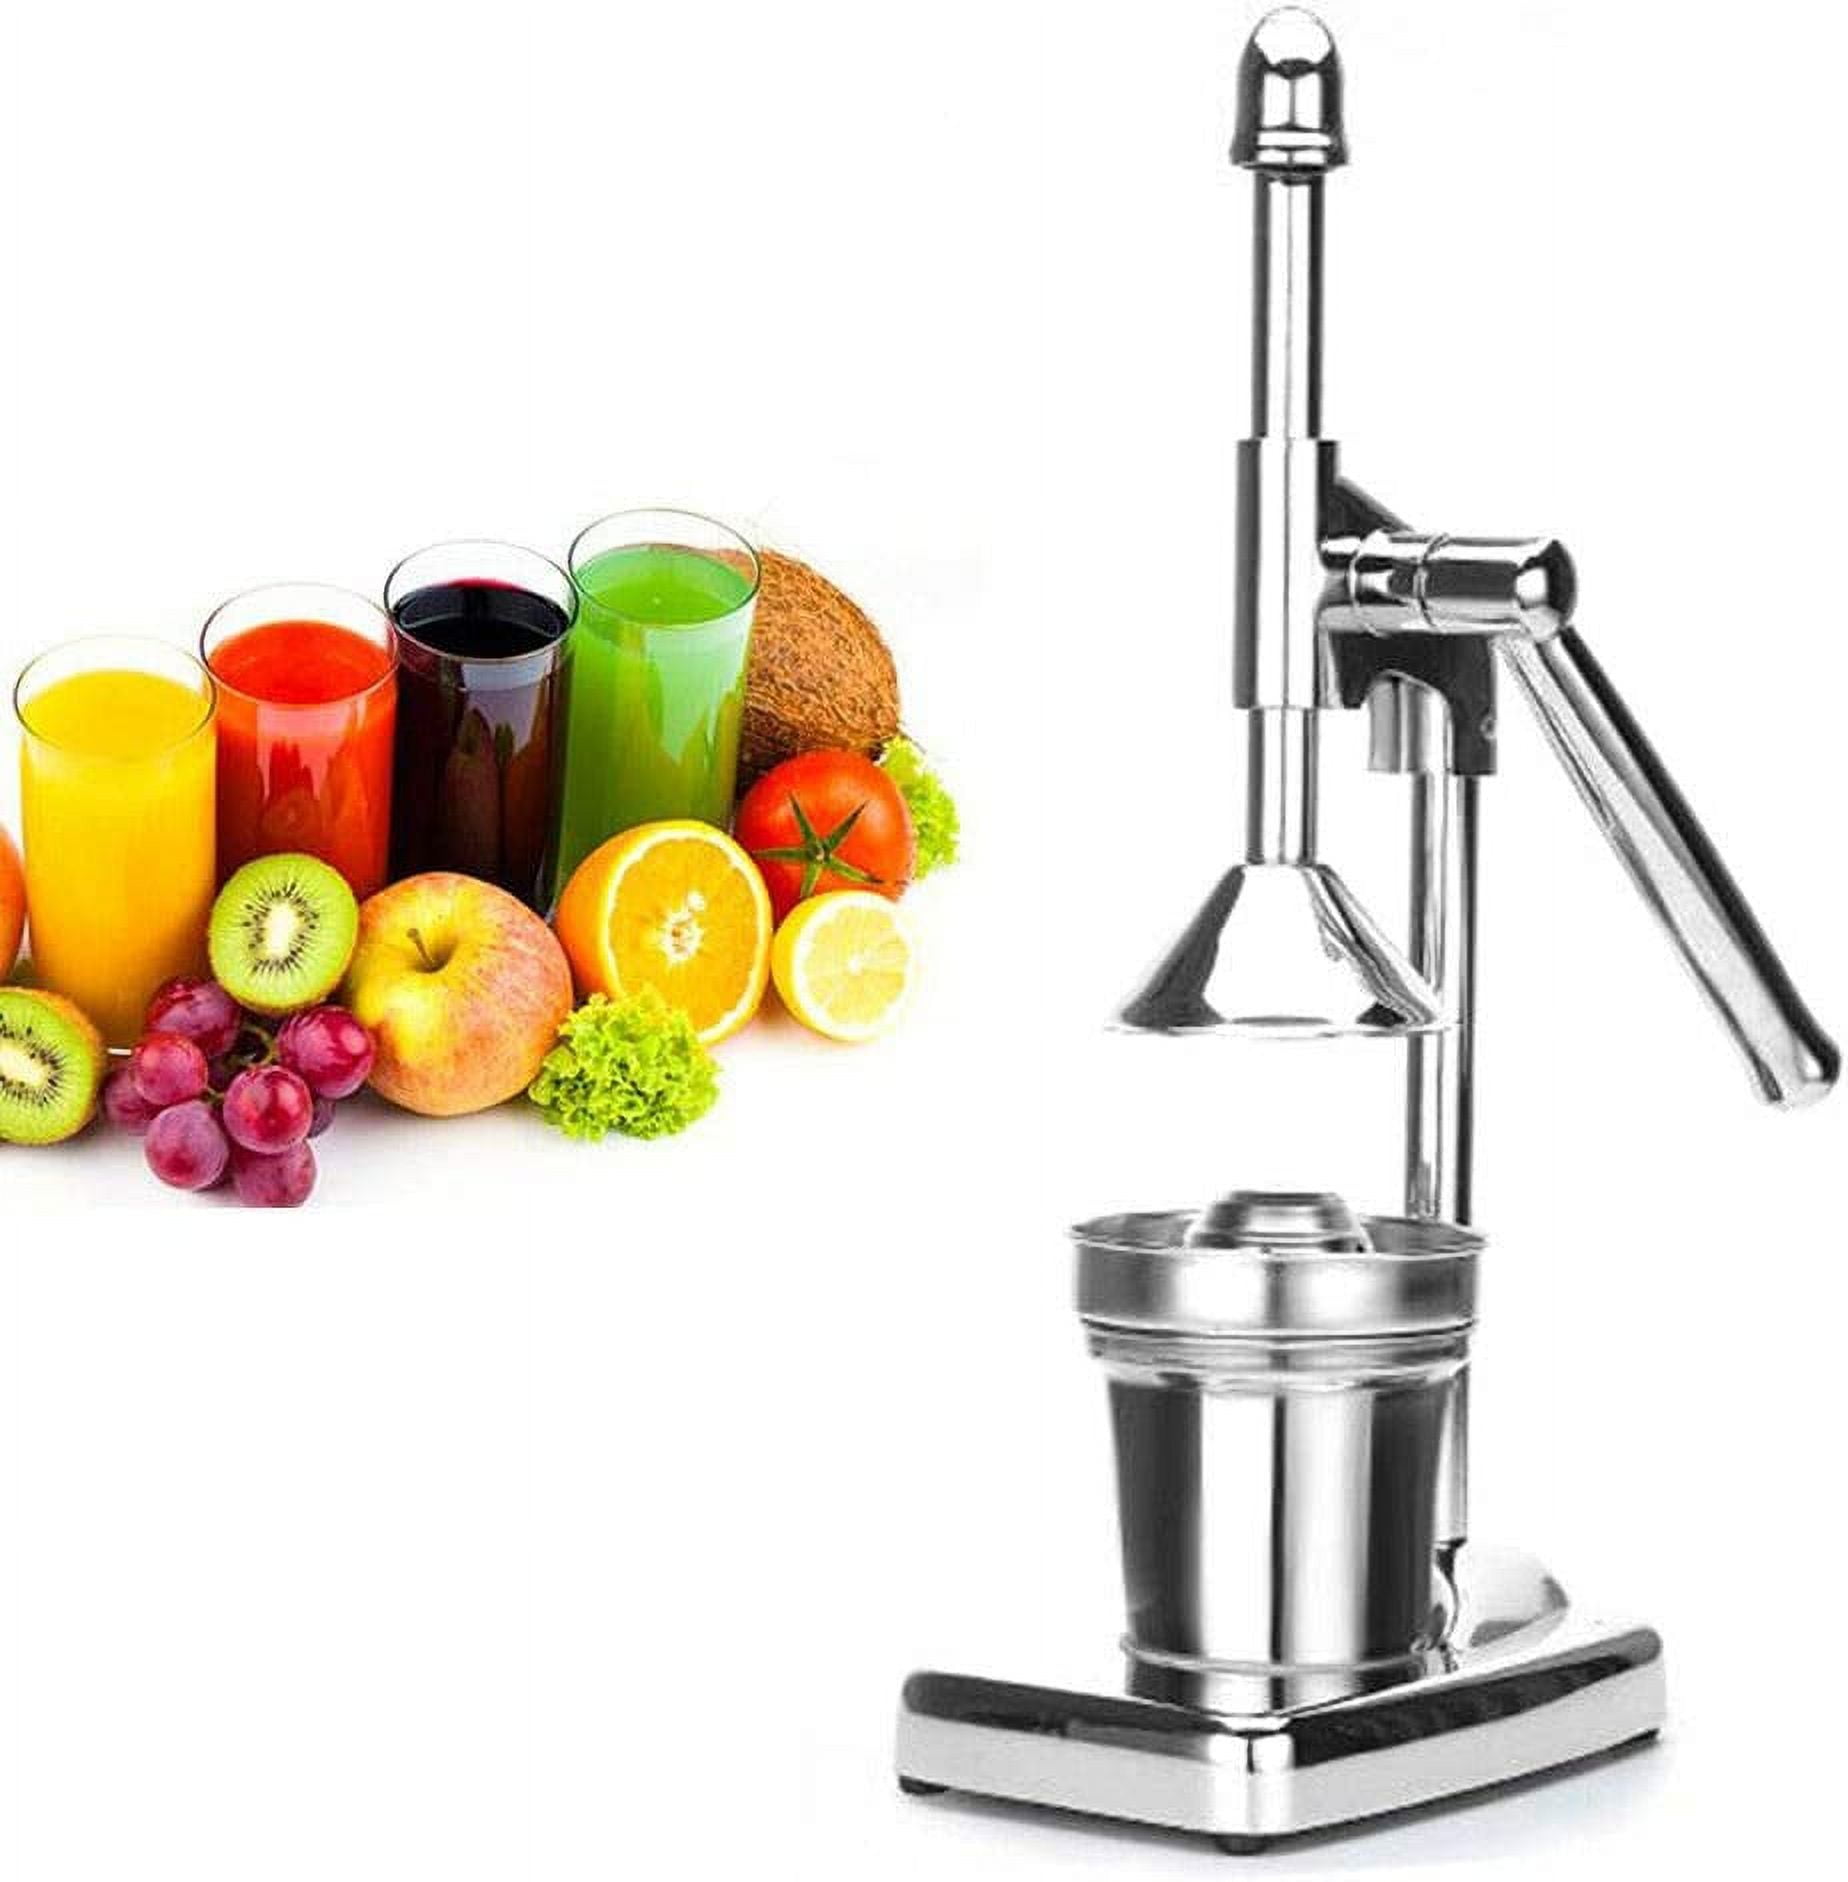  Zulay Kitchen Cast-Iron Orange Juice Squeezer - Heavy-Duty,  Easy-to-Clean, Professional Citrus Juicer - Durable Stainless Steel Lemon  Squeezer - Sturdy Manual Citrus Press & Orange Squeezer (Red): Home &  Kitchen